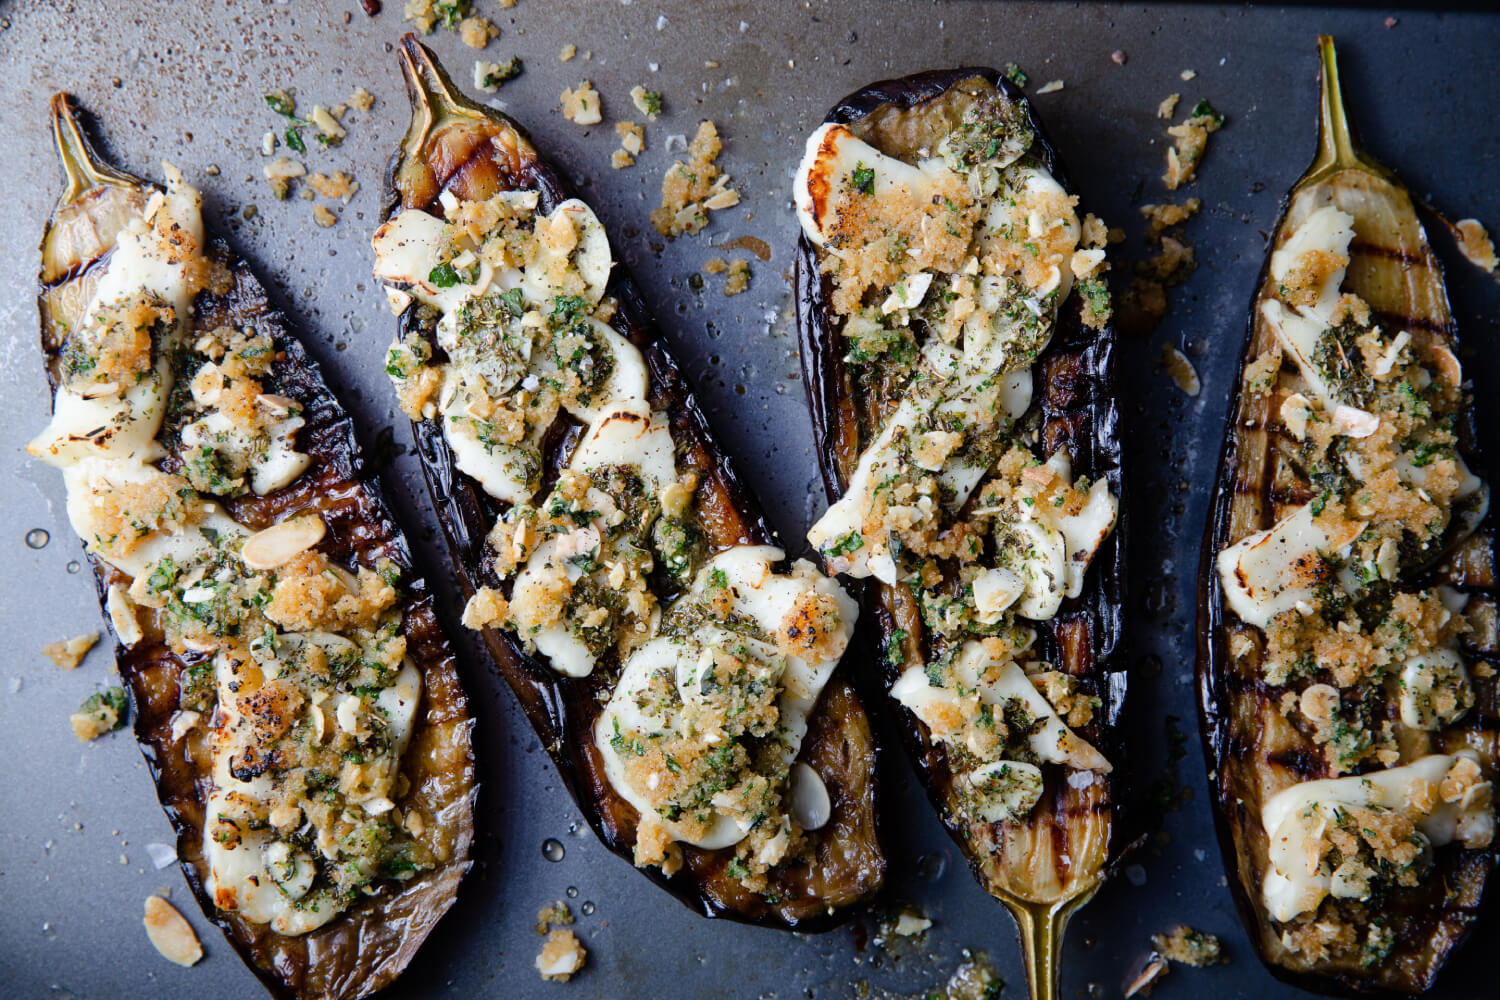 Baked aubergine, halloumi and herby maple crumb